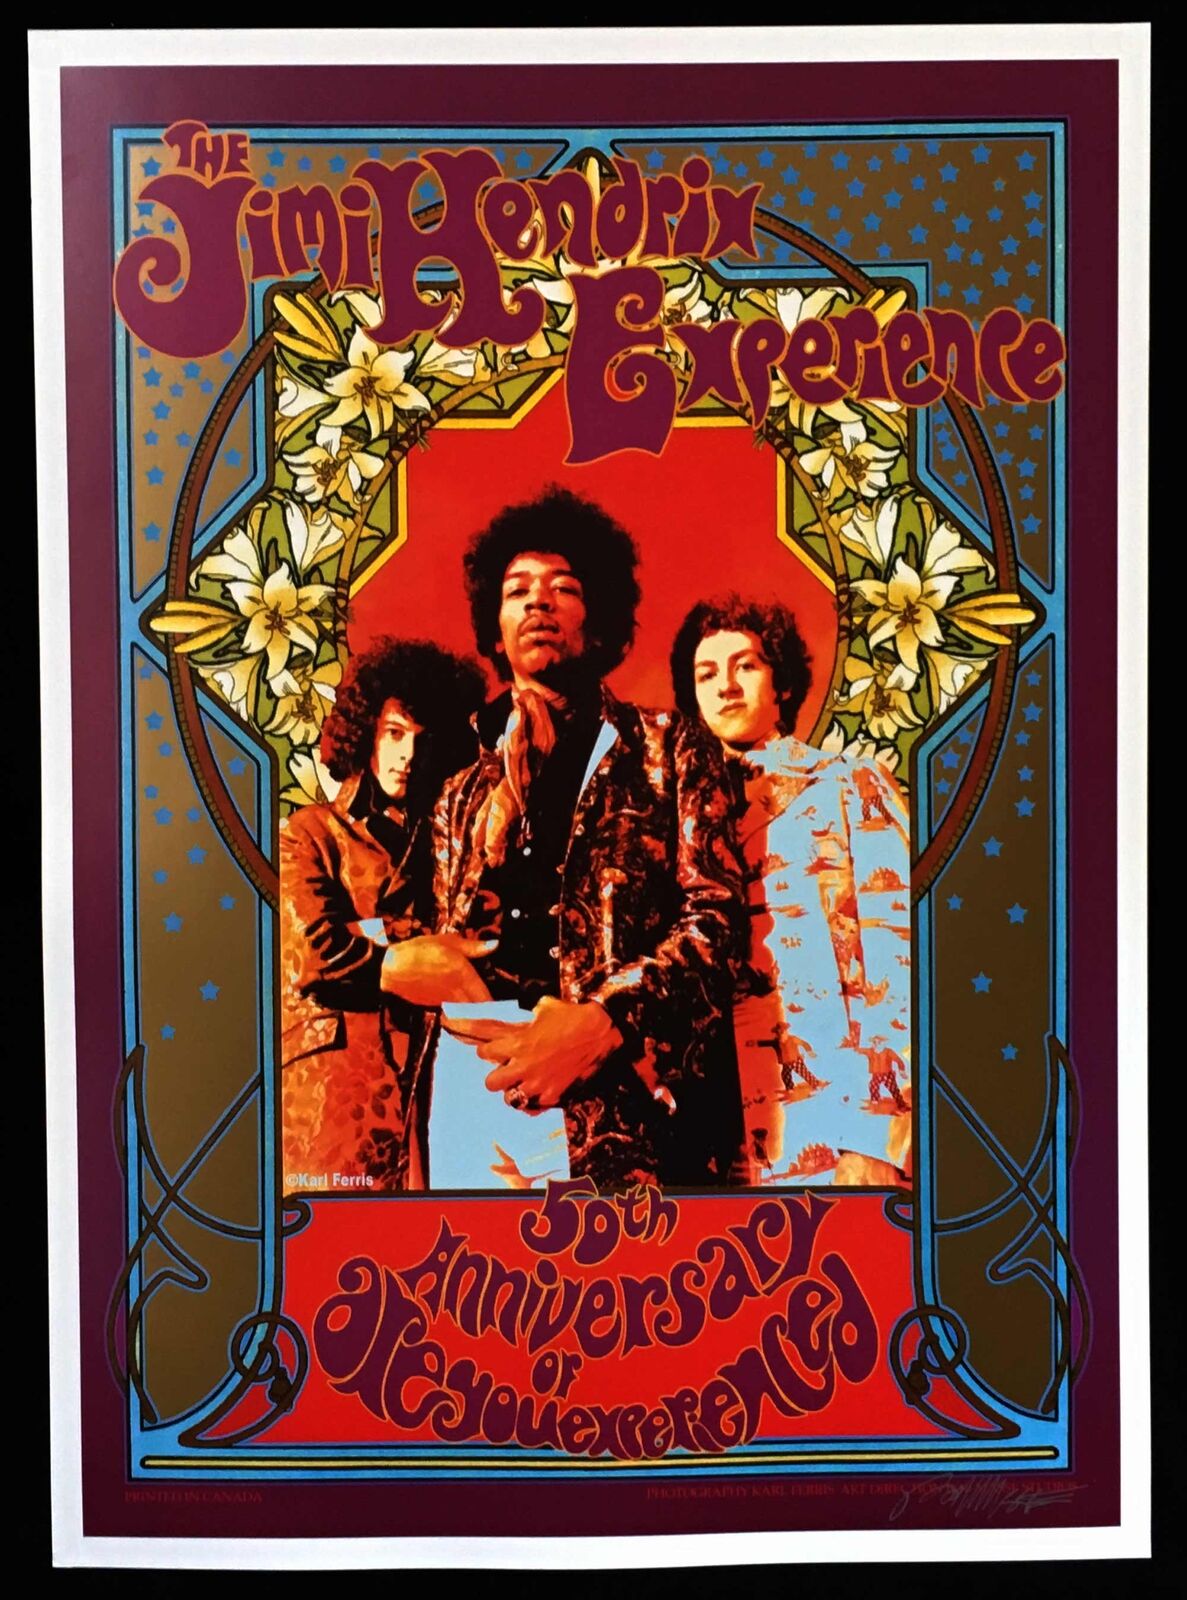 Jimi Hendrix Poster 50th Anniversary Are You Experienced?